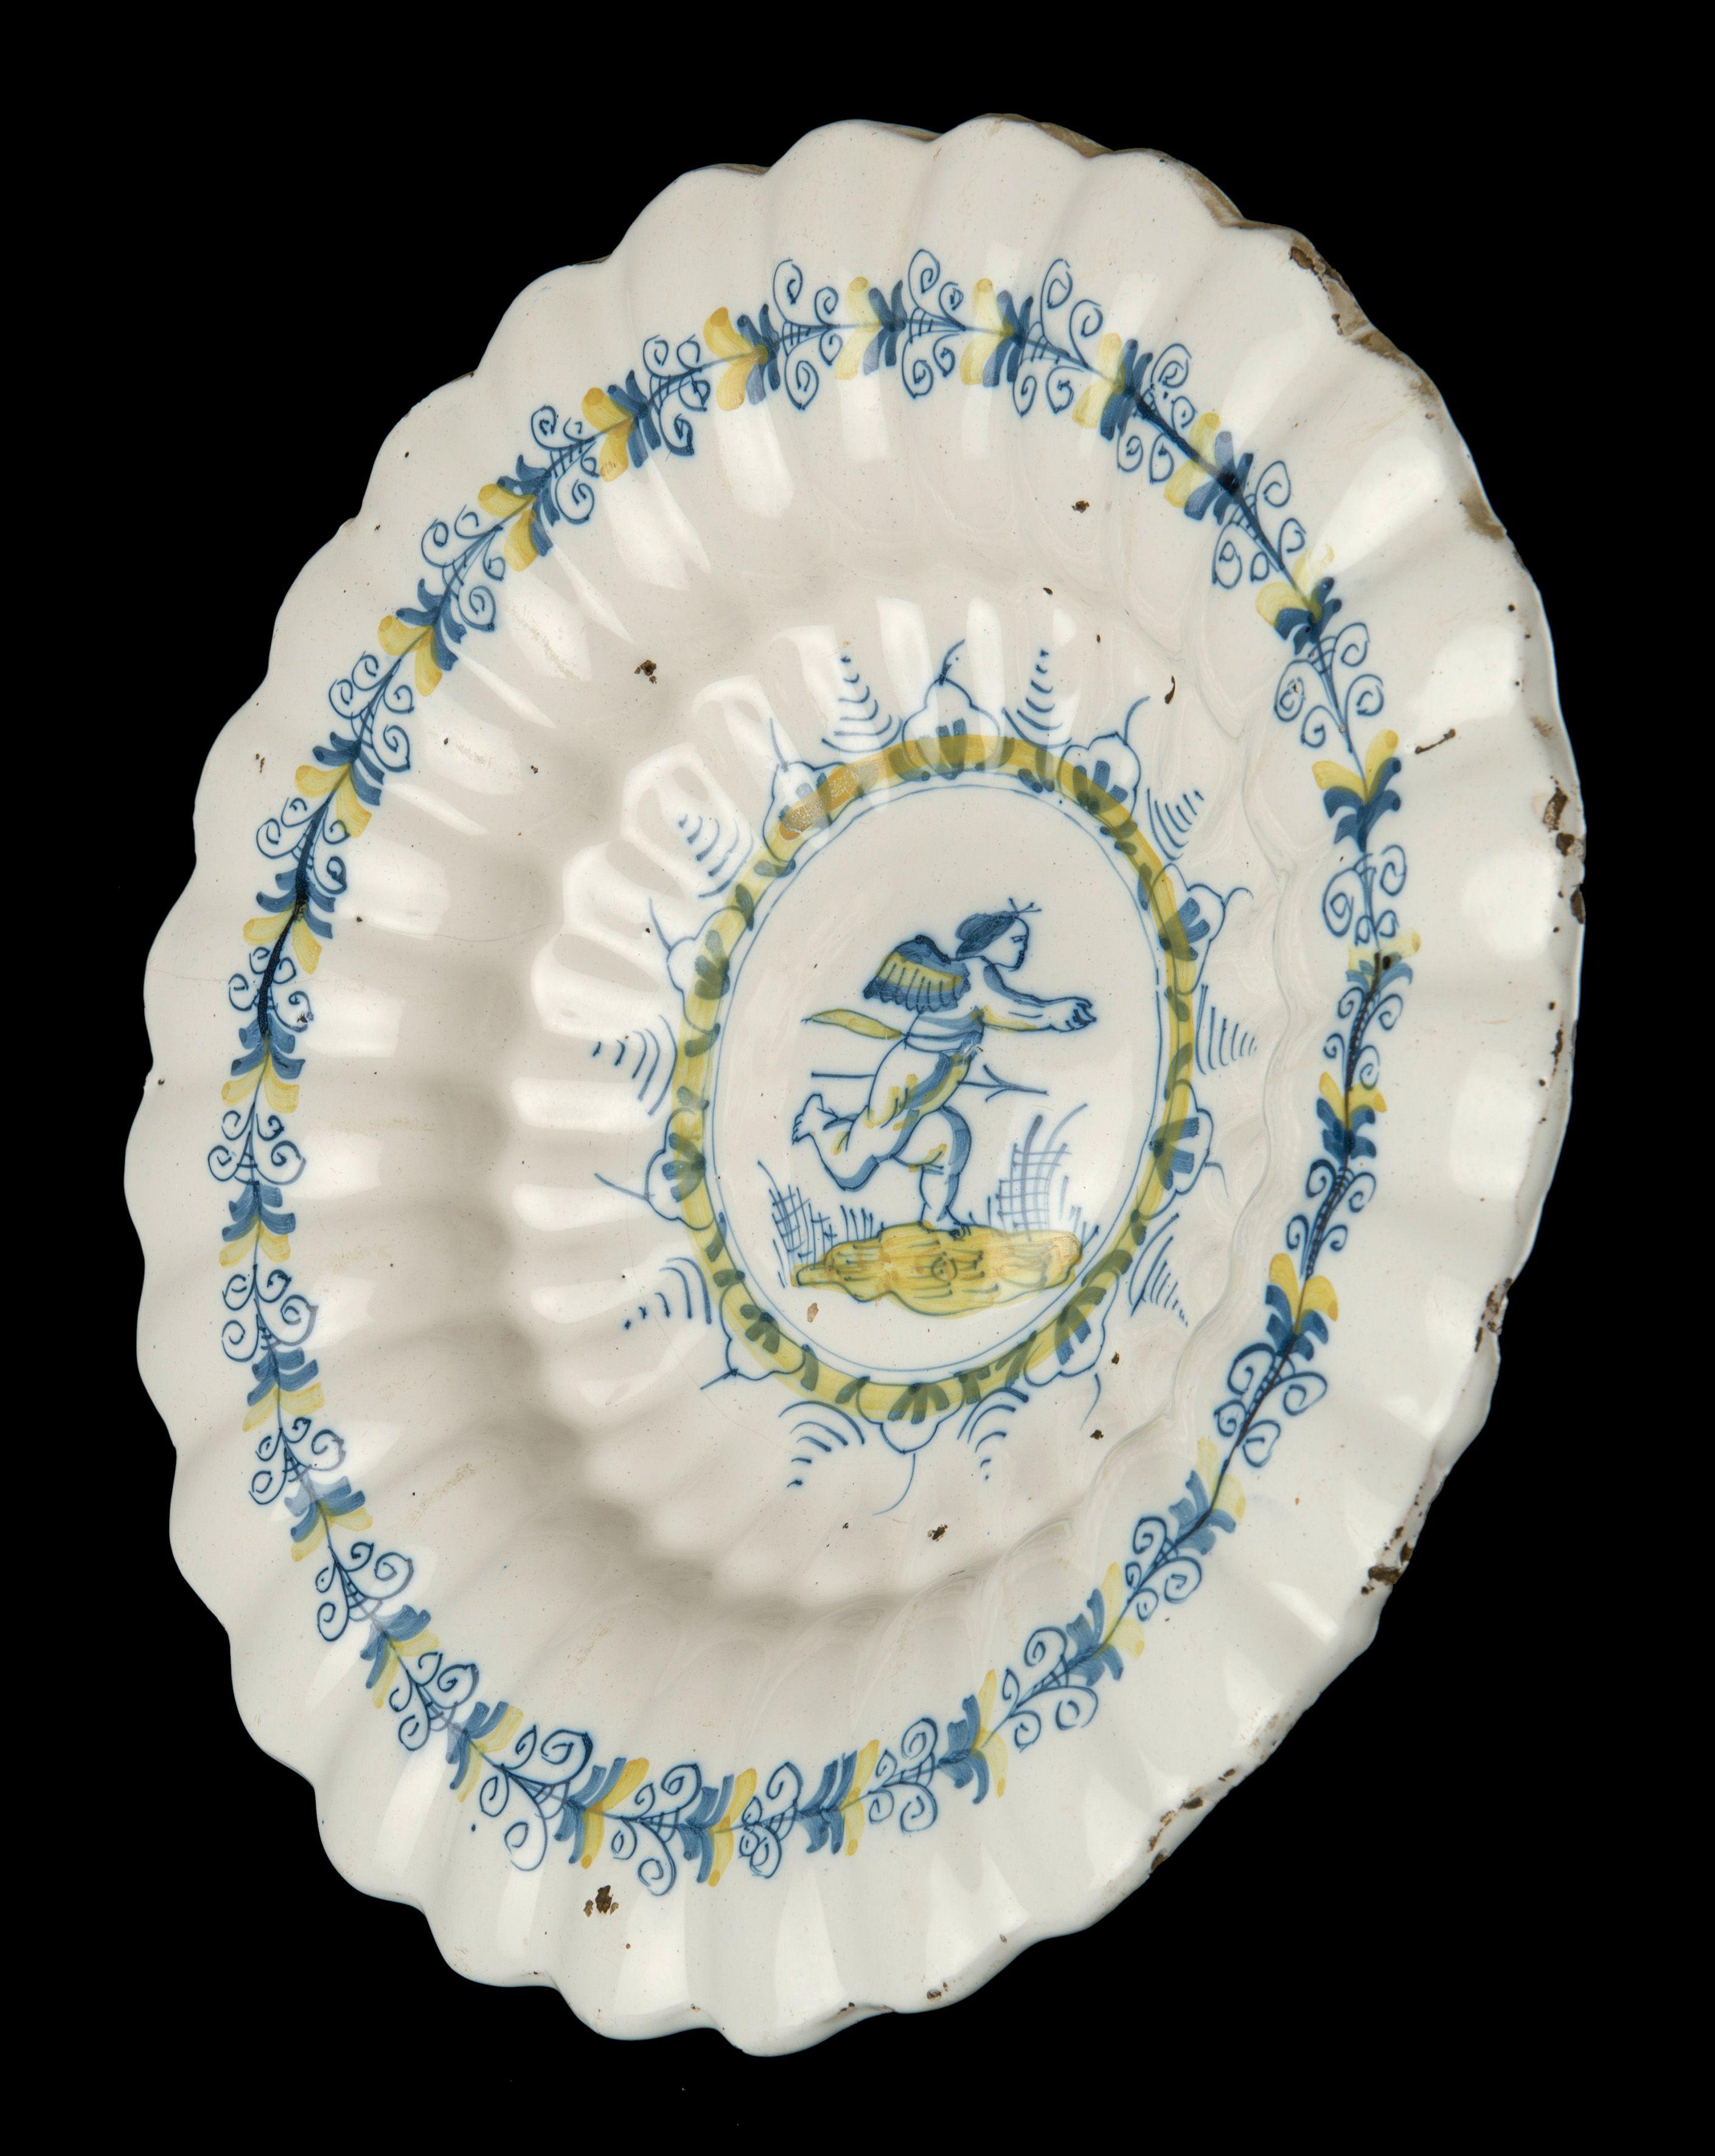 The lobed dish is composed of twenty-seven double lobes and is painted in blue and yellow with a running putto with a spear. The depiction is framed in several circles and a band of stylized floral ornaments. An aigrette motif is applied in the